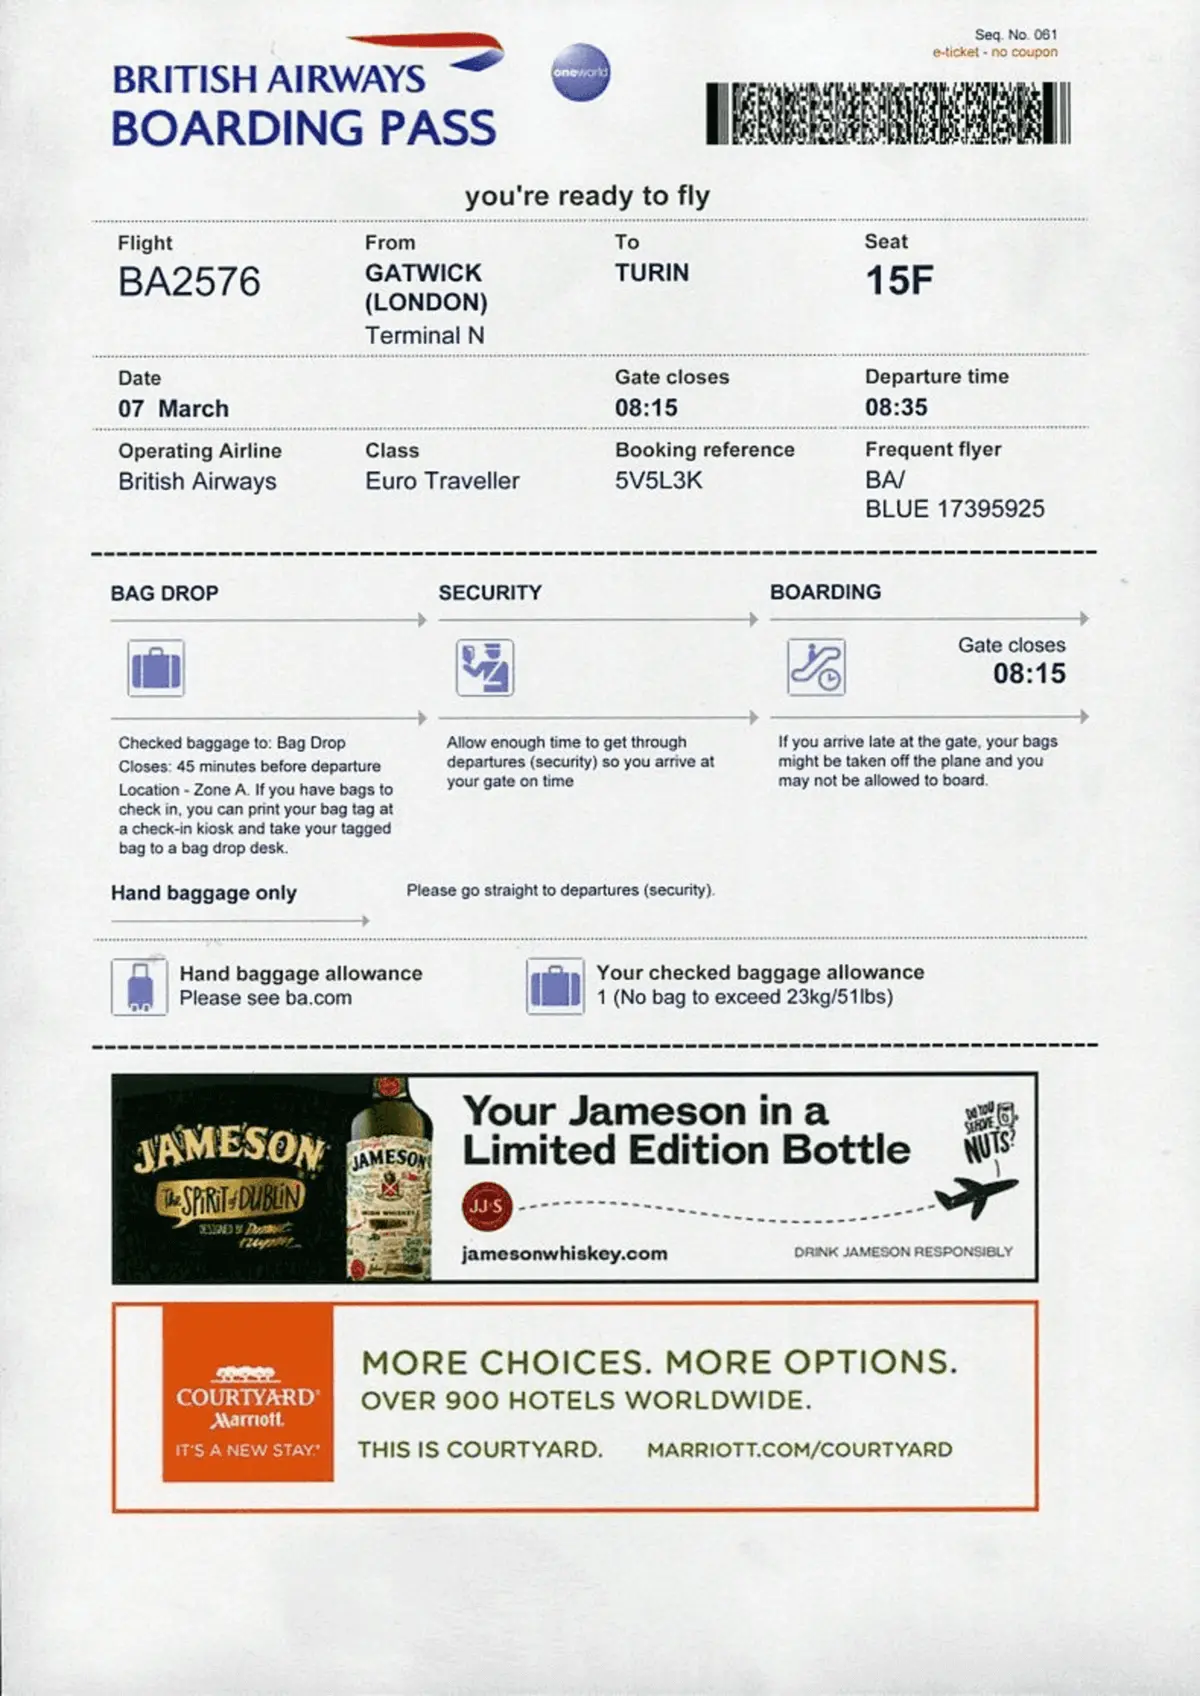 Amsterdam Airport Ams Advertising Boarding Passes A1